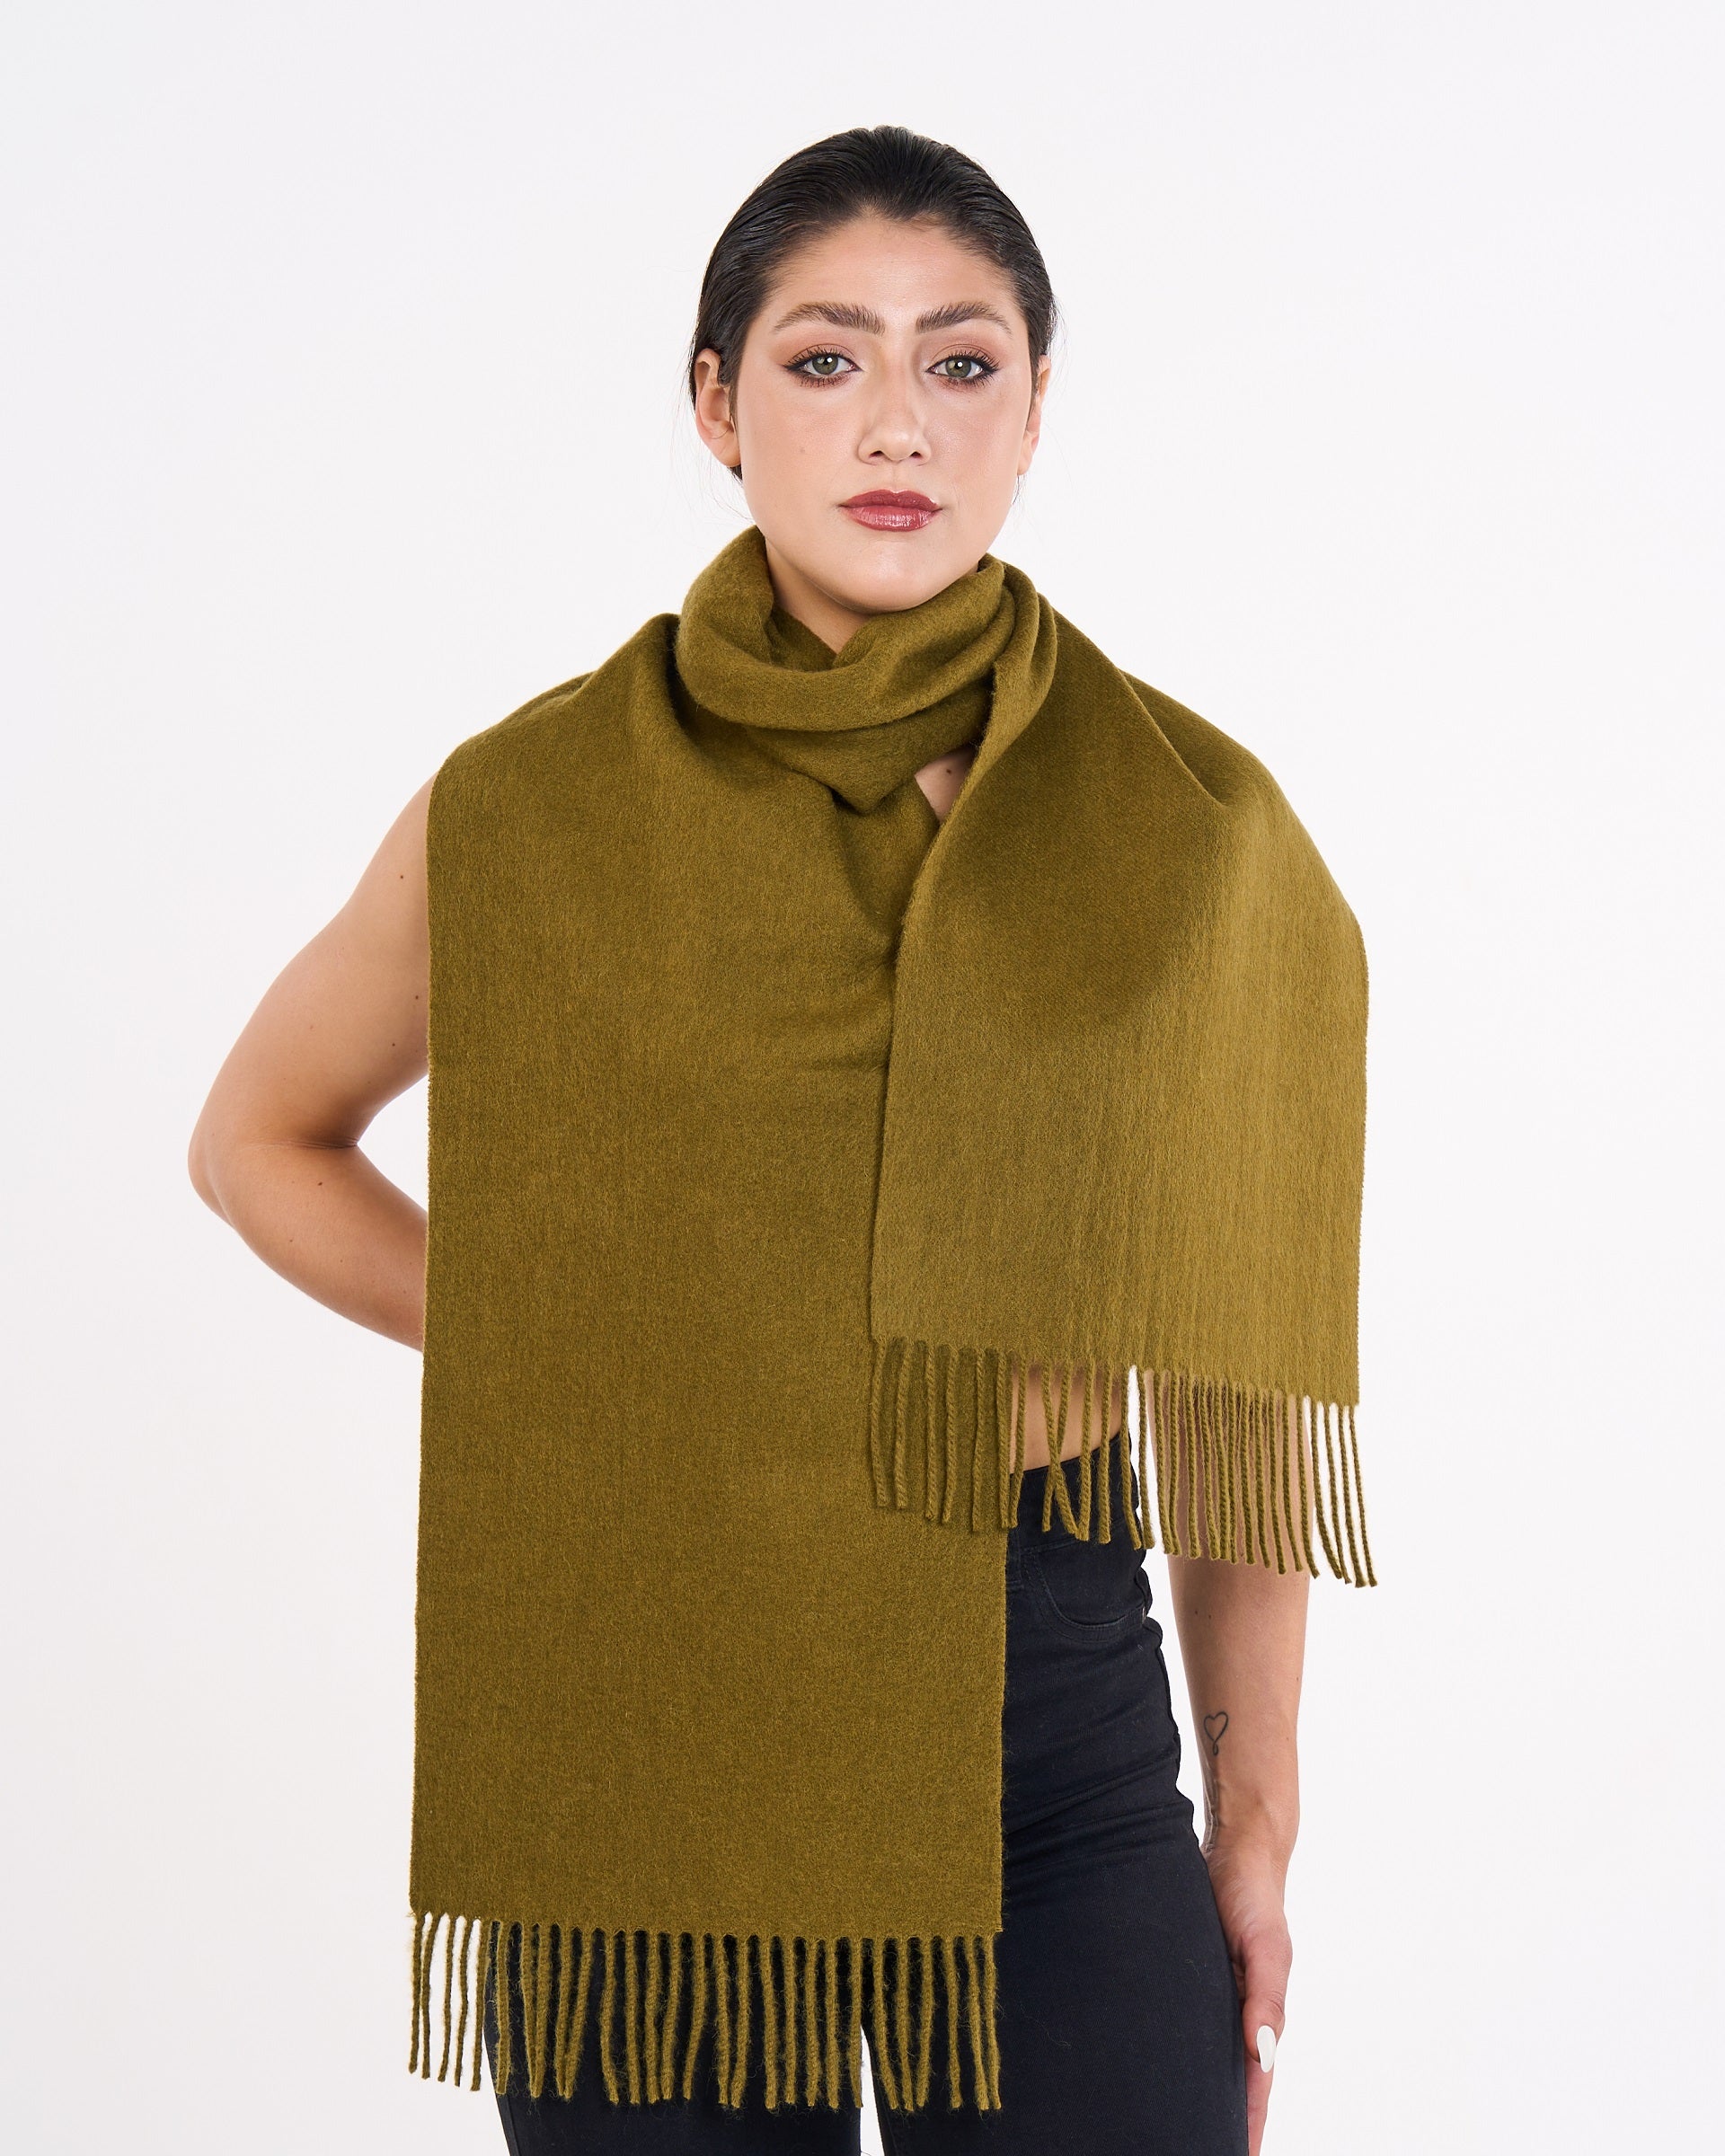 Cashmere Scarves for Special Occasions